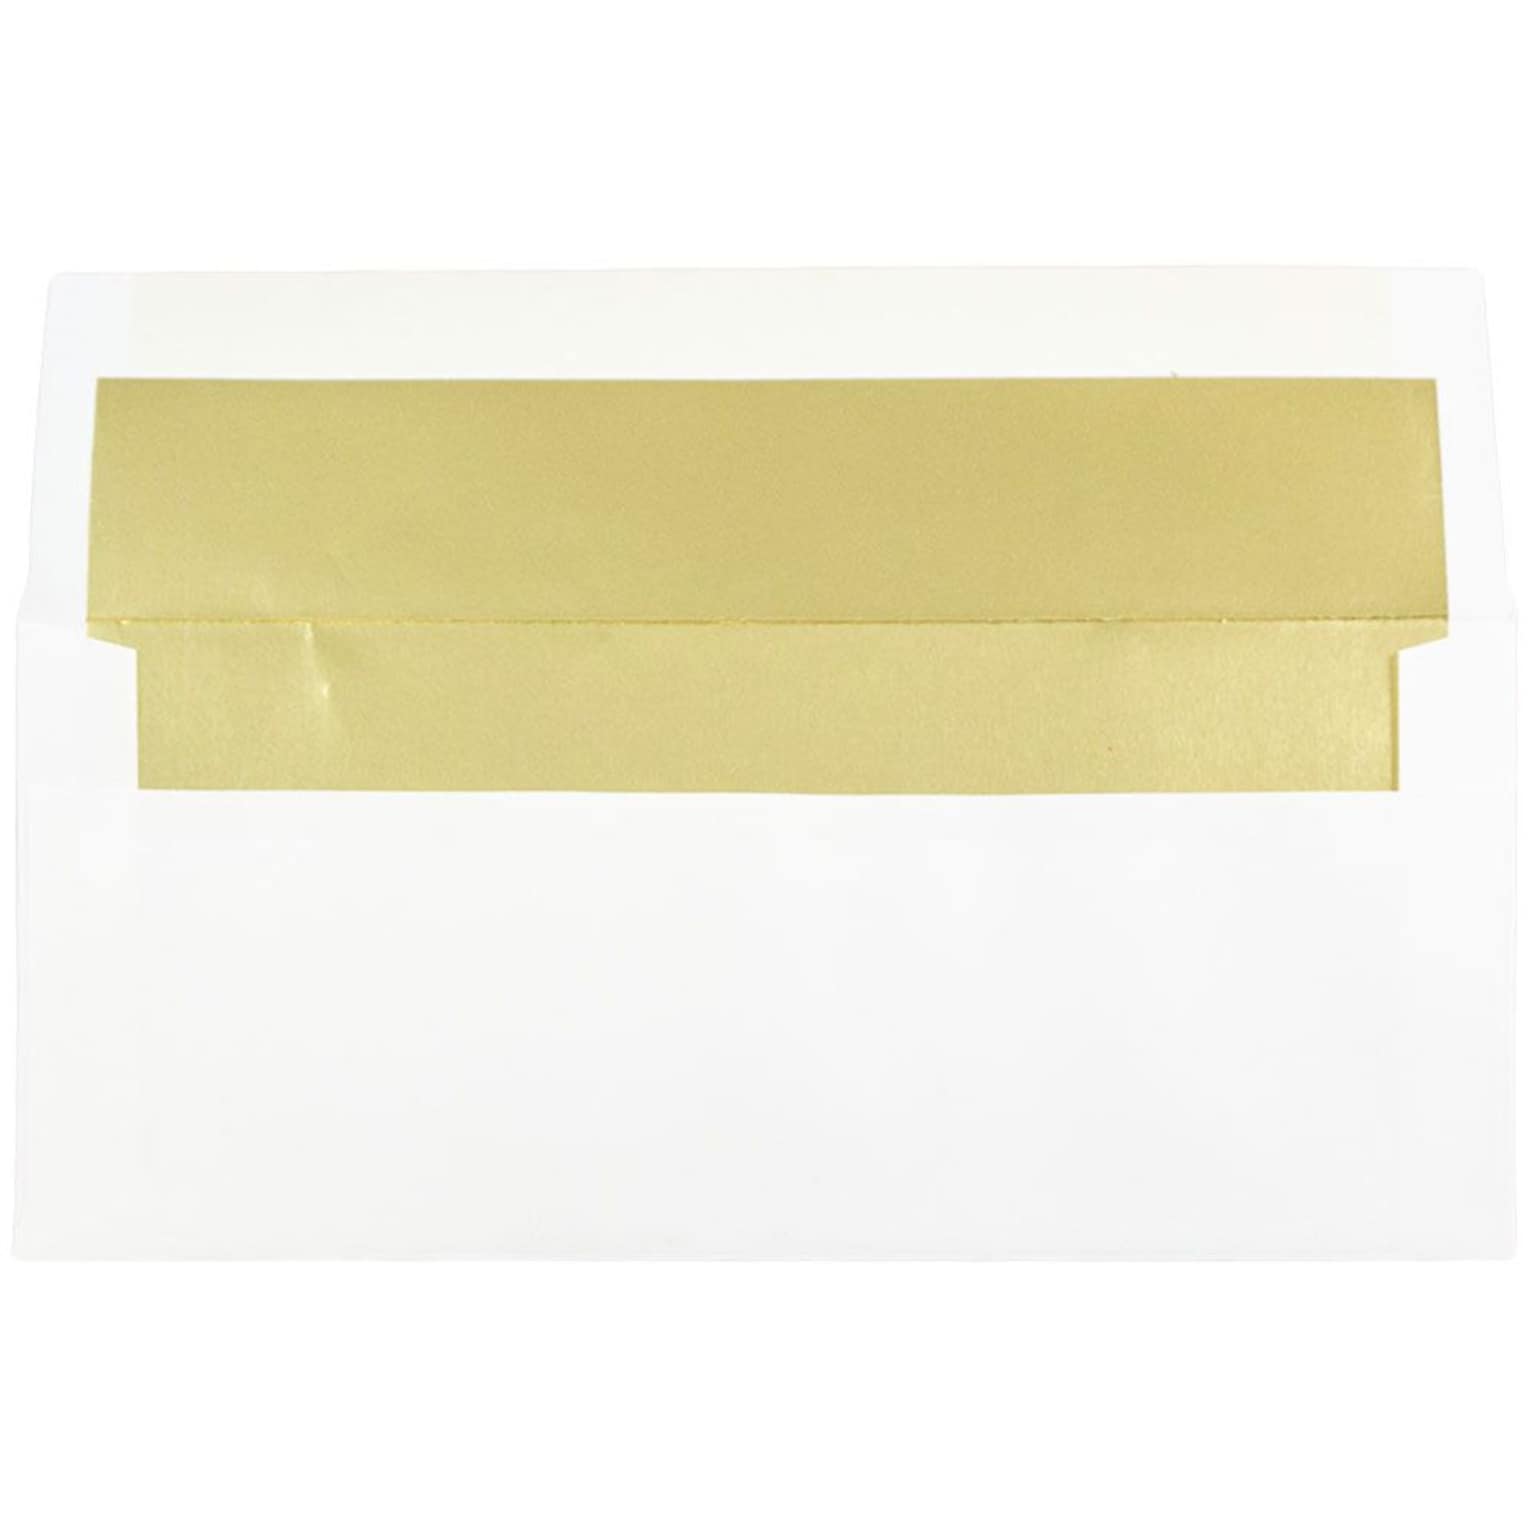 JAM Paper #10 Business Foil Lined Envelopes, 4 1/8 x 9 1/2, White with Gold Foil, 25/Pack (95165)